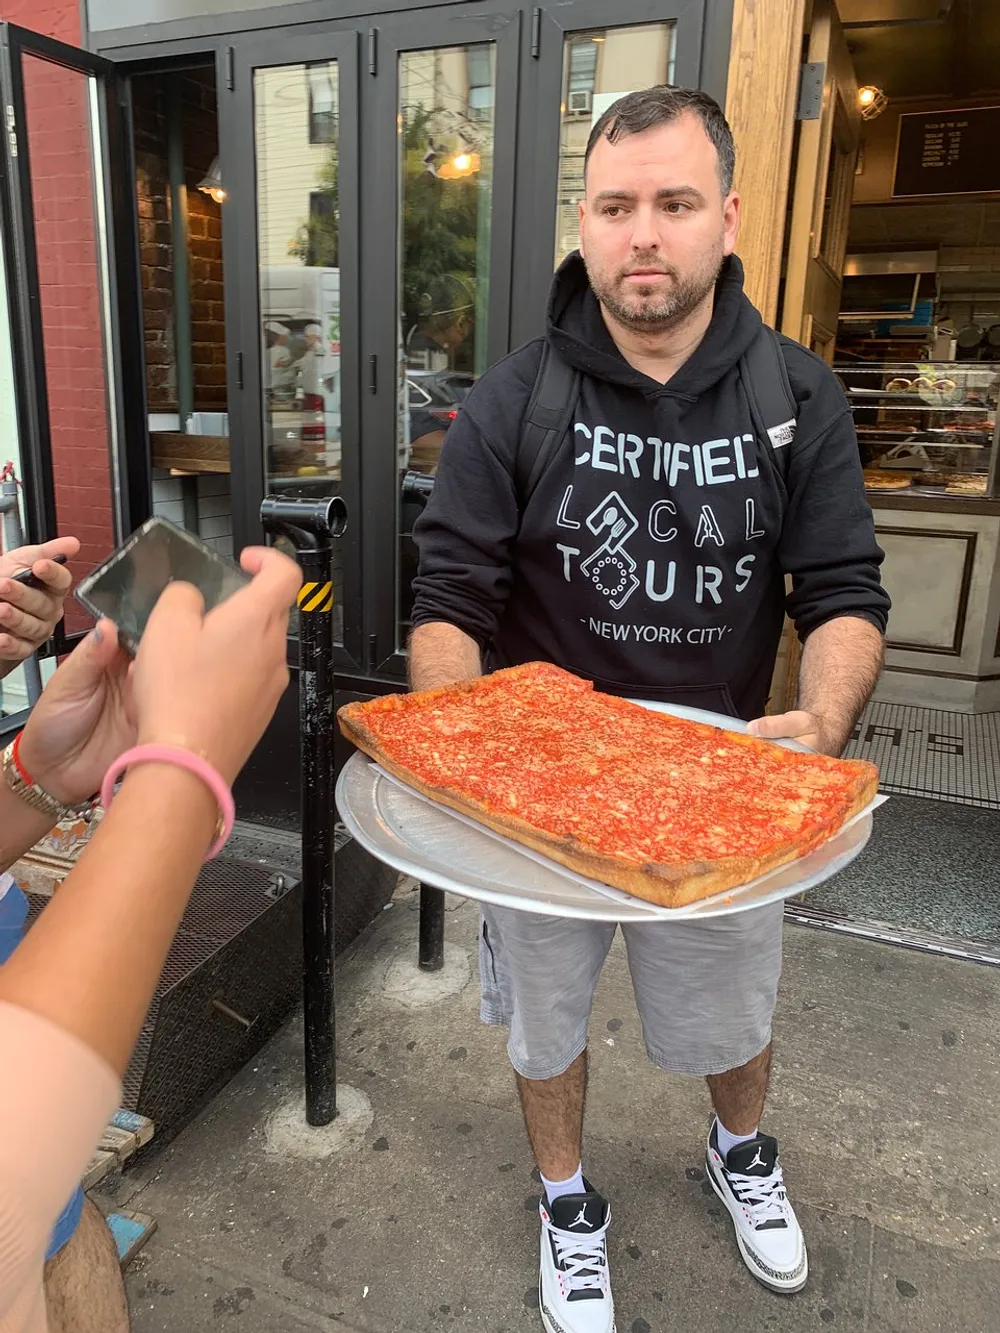 A man is holding a very large slice of pizza on a plate while someones hand is visible with a phone likely taking a photo of the impressive slice